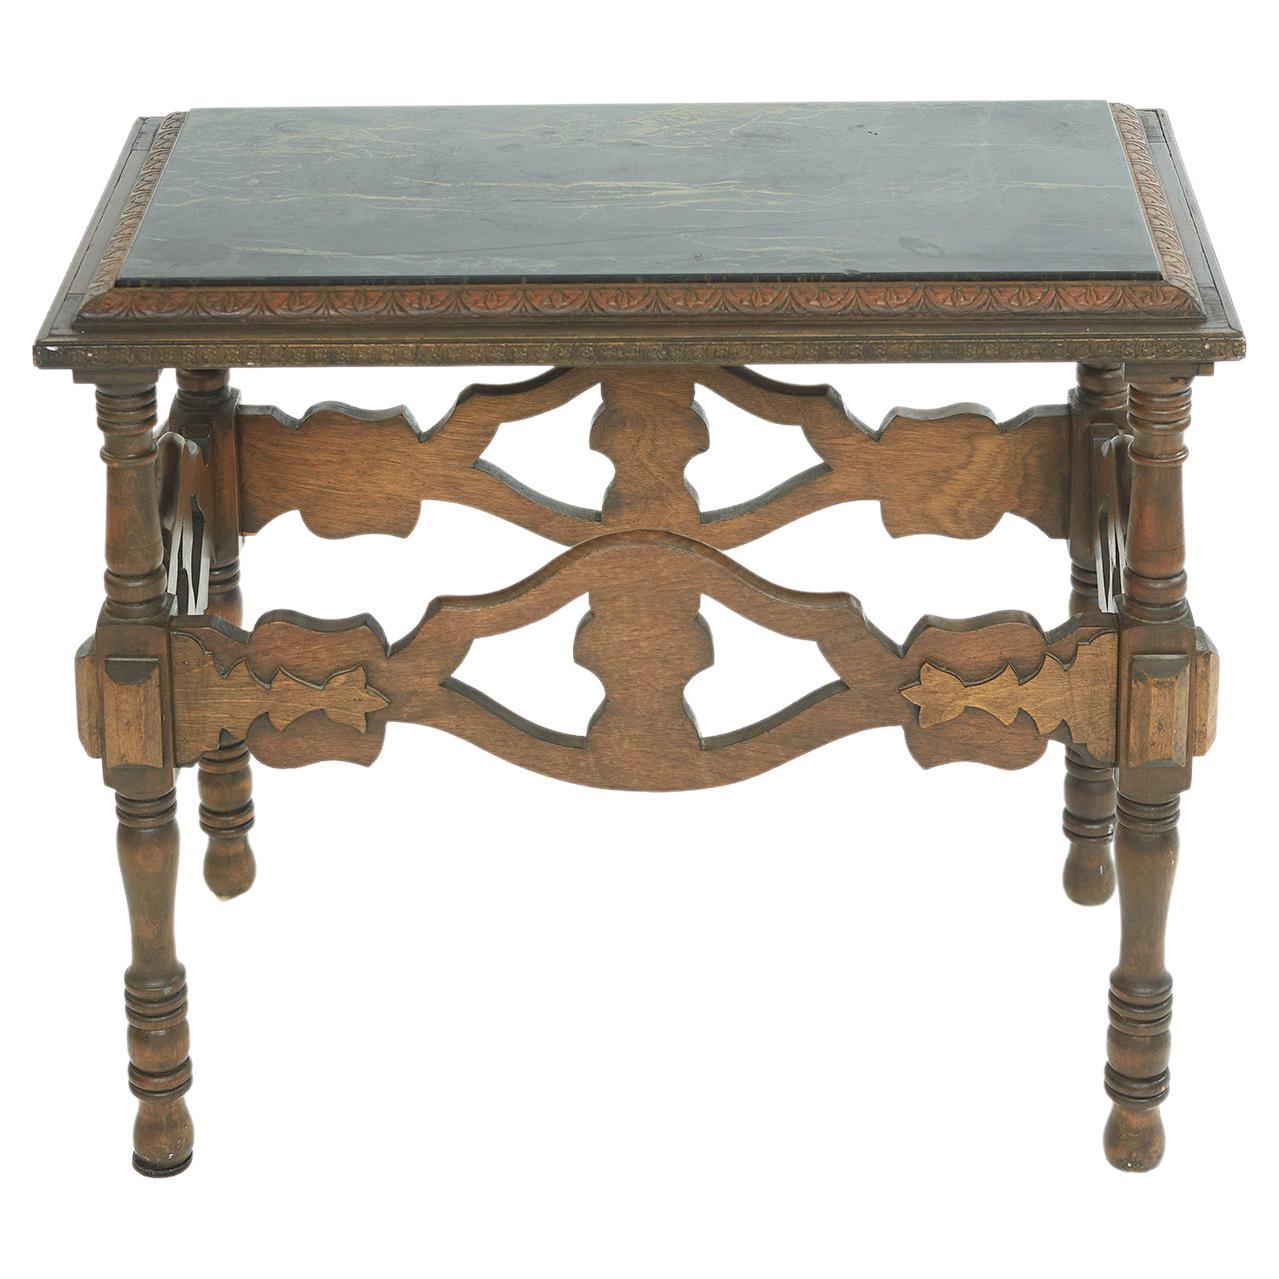 19th Century English Arts & Crafts Side Table